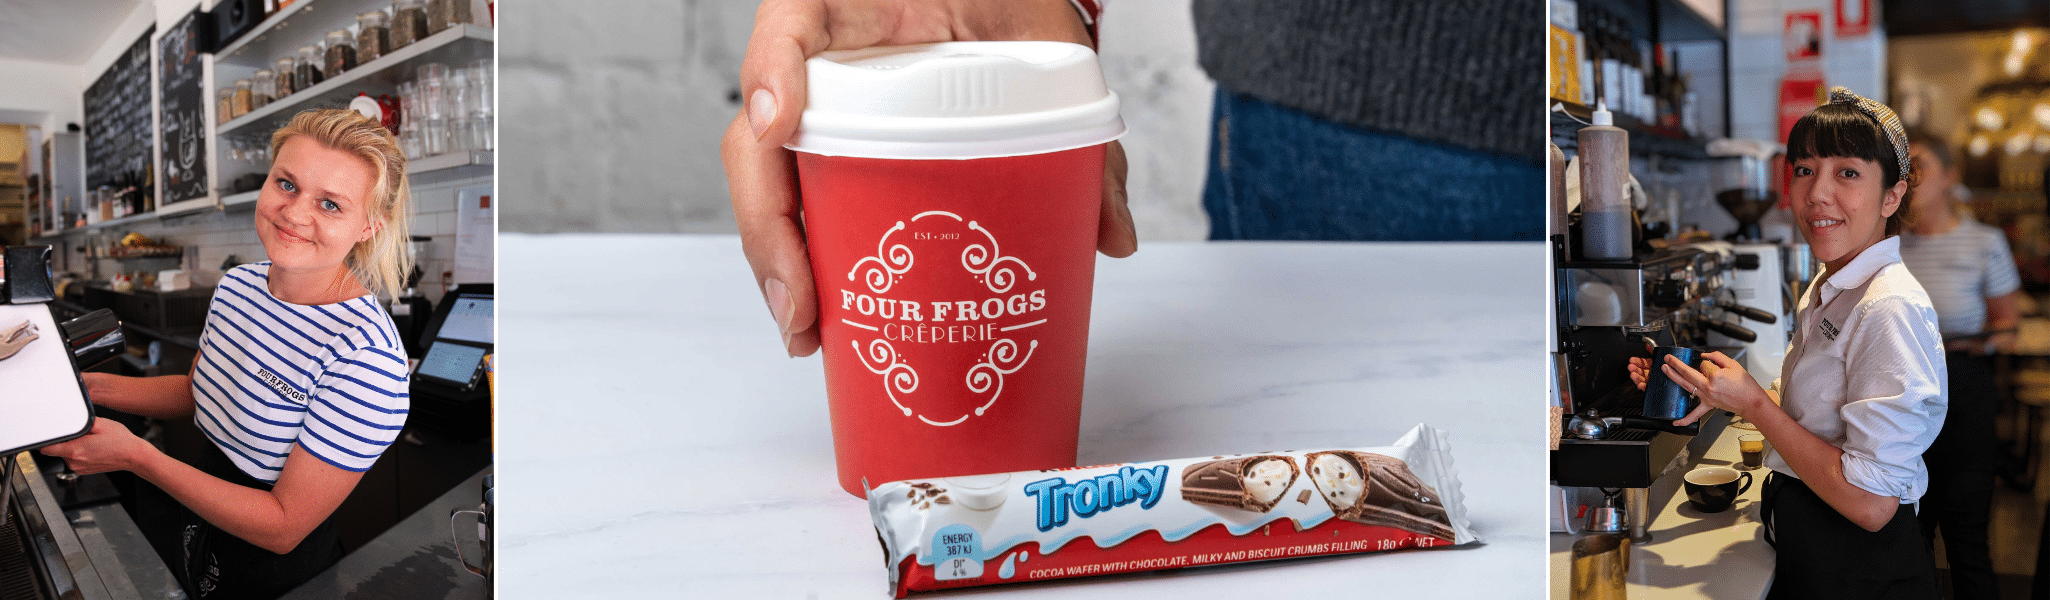 Four Frogs x Nutella free tronky bar with takeaway coffee